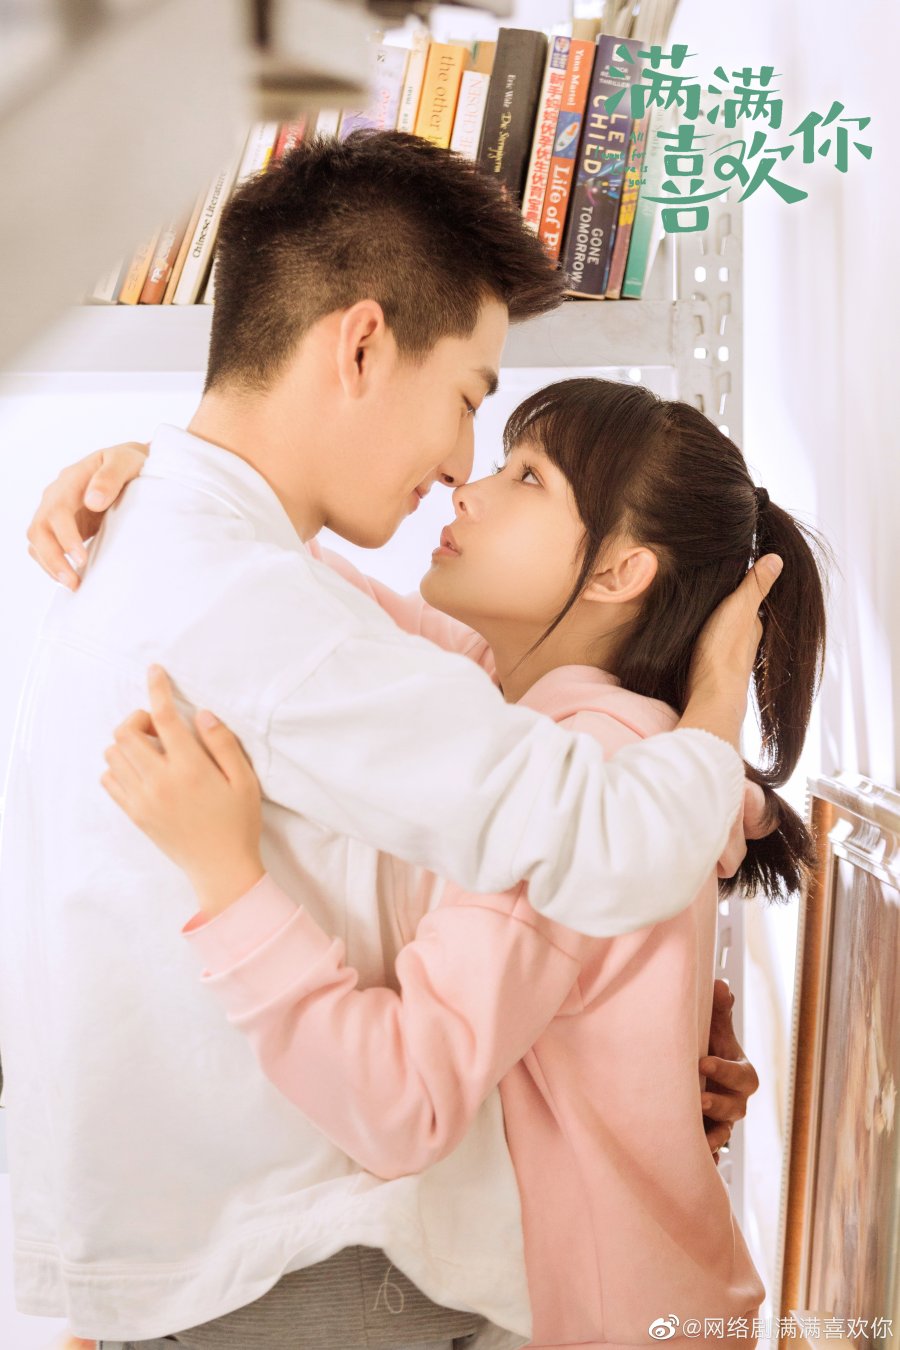 All I Want for Love is You (Chinese Drama)